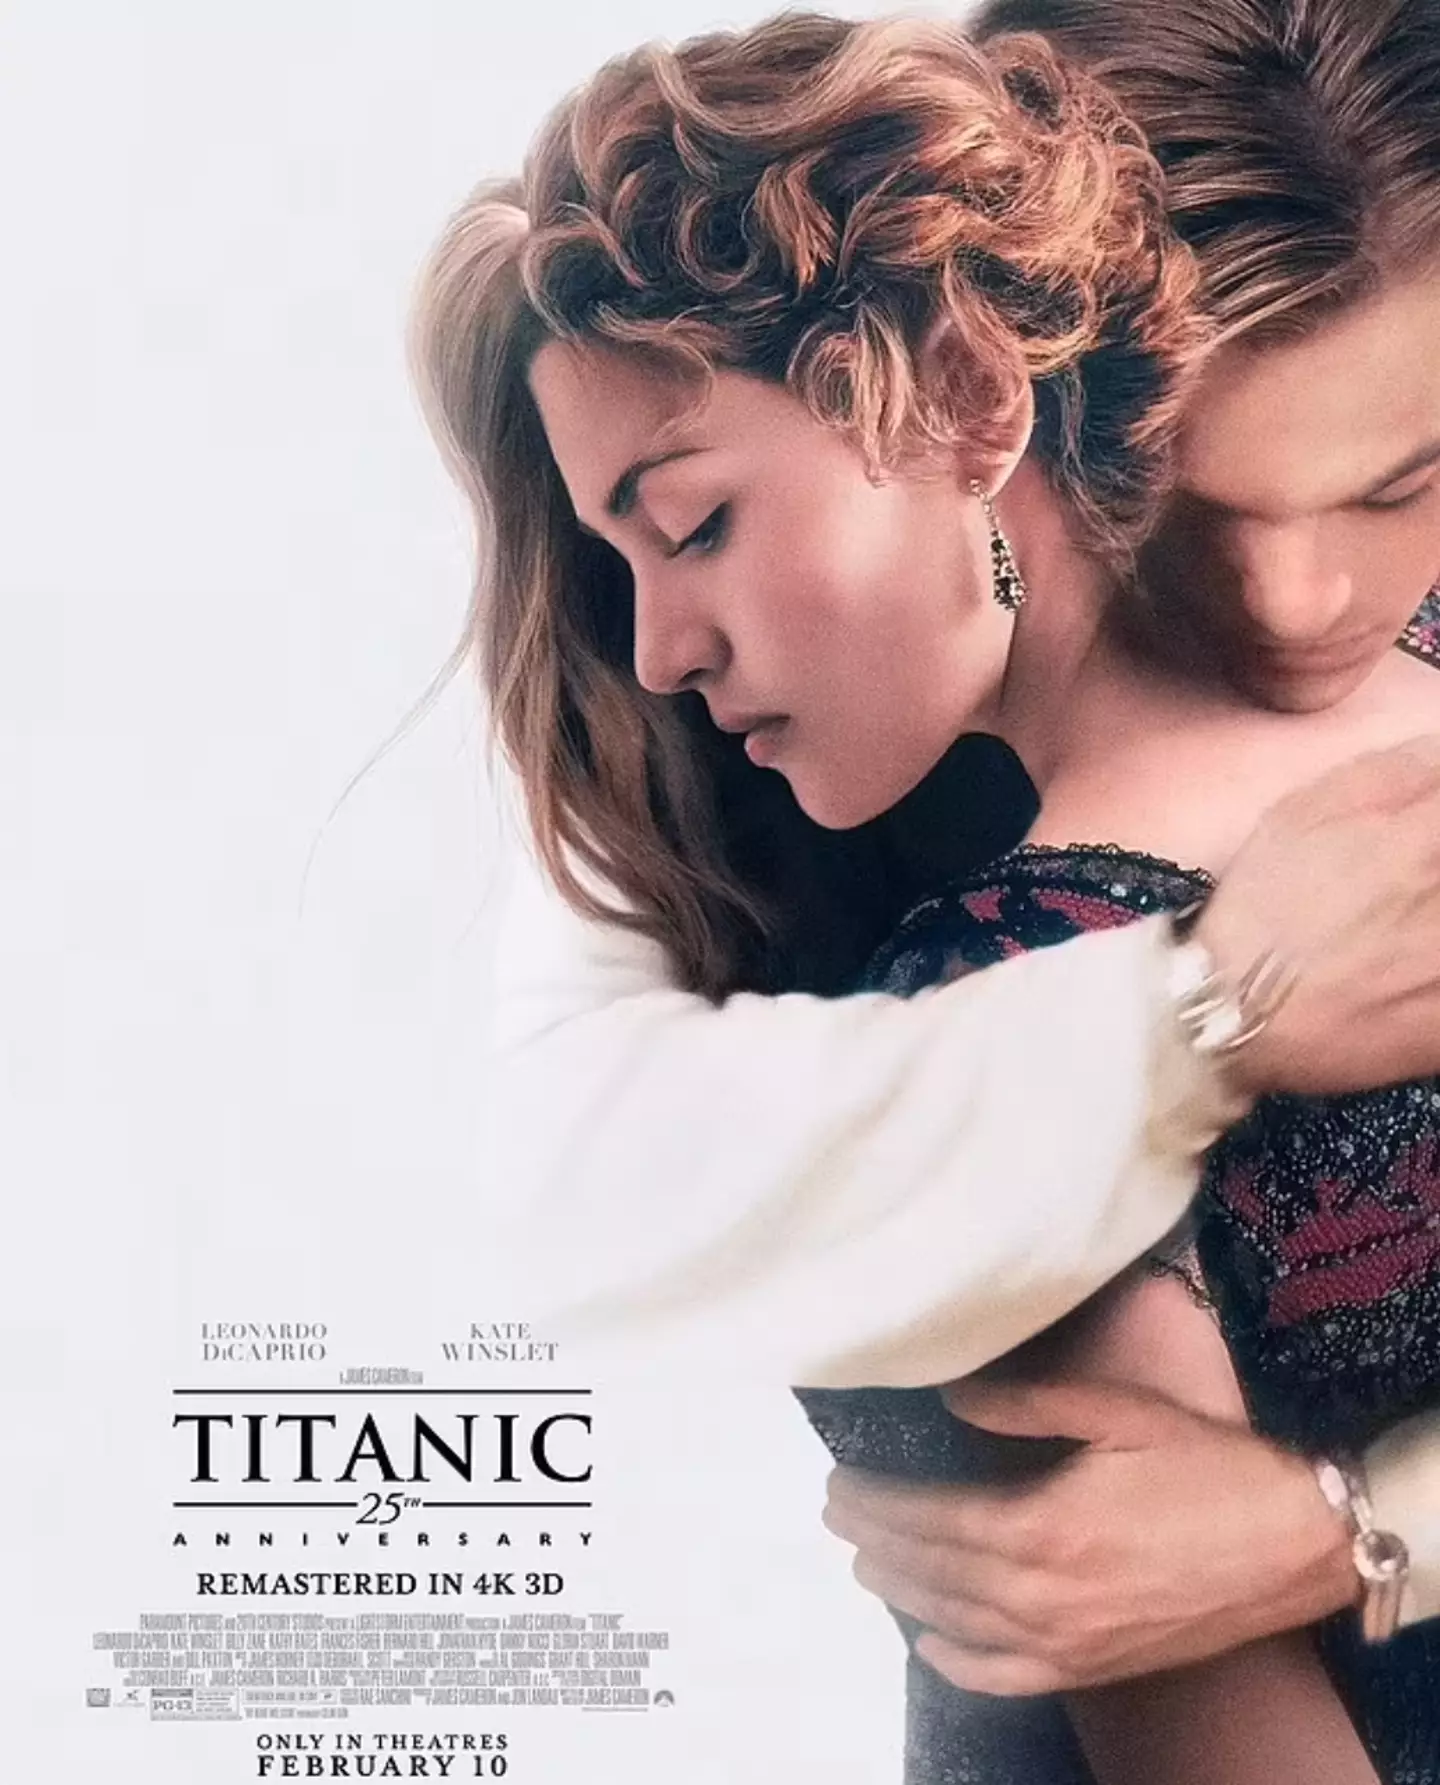 Kate Winslet appears to have two hair styles in the Titanic re-release poster.